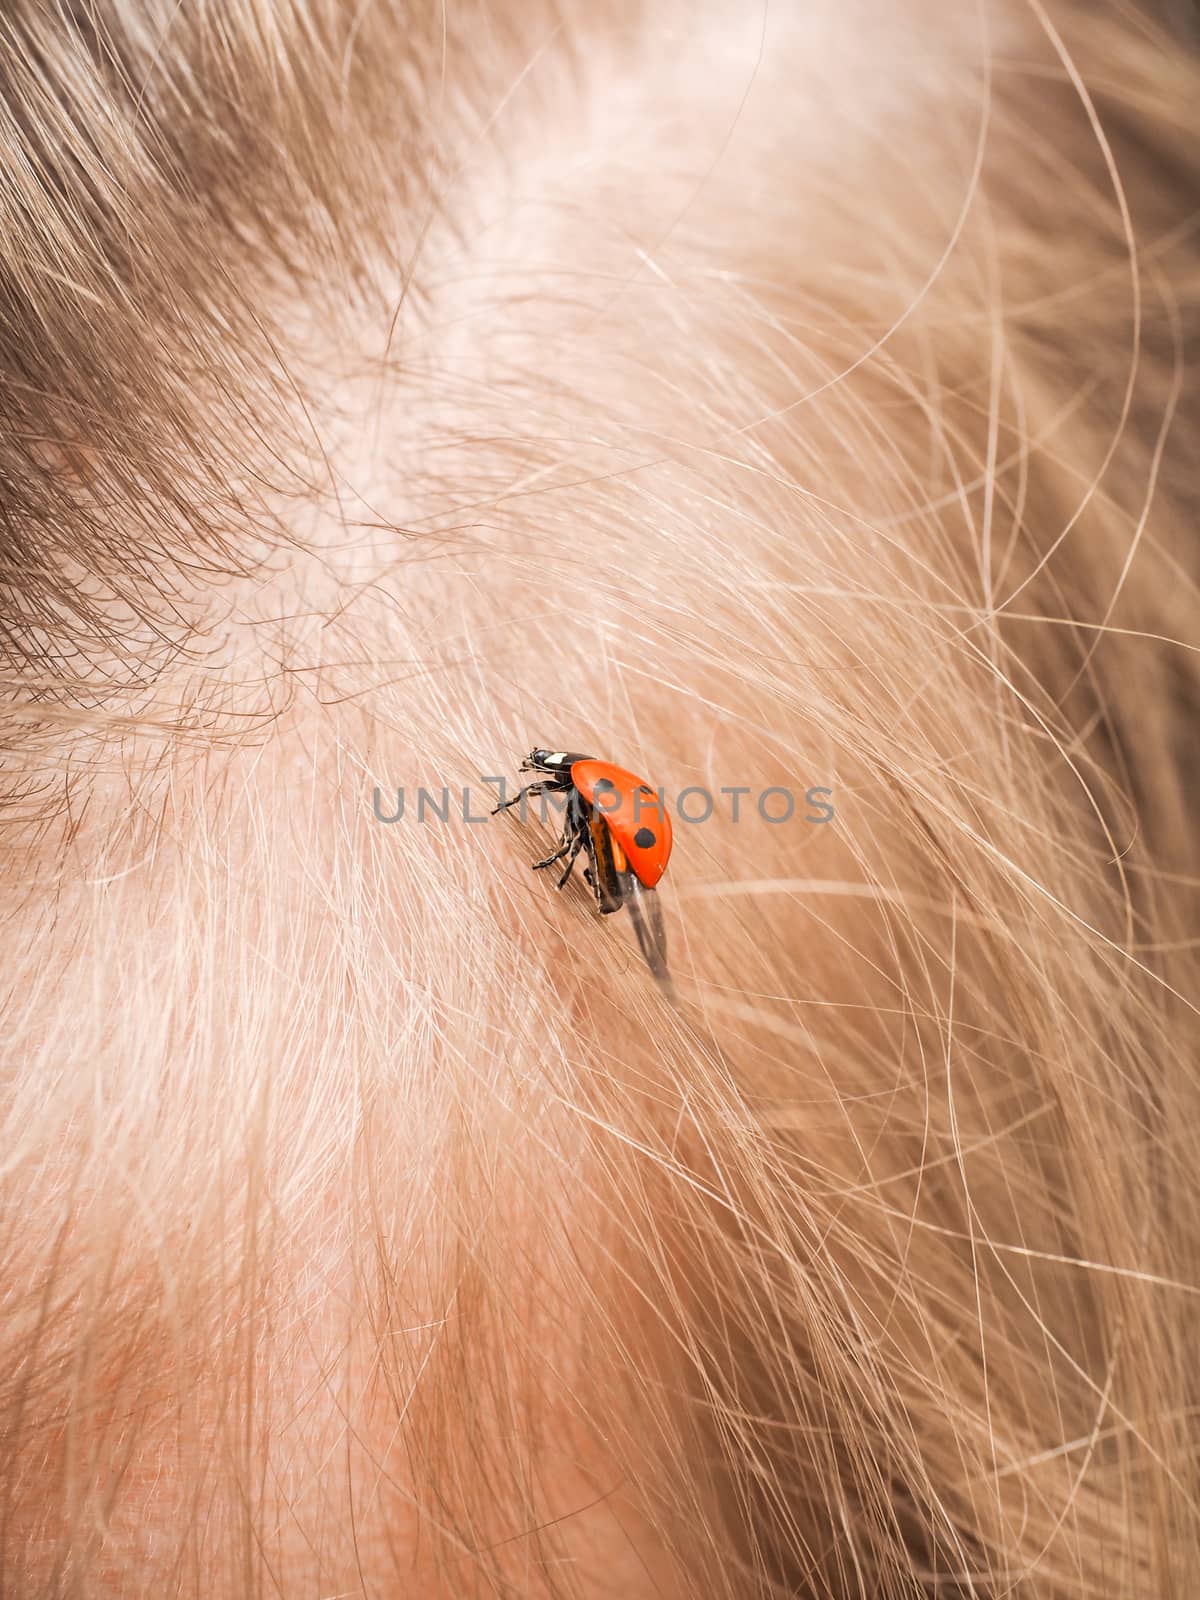 Ladybird walking in a persons hair with folded wings by Arvebettum